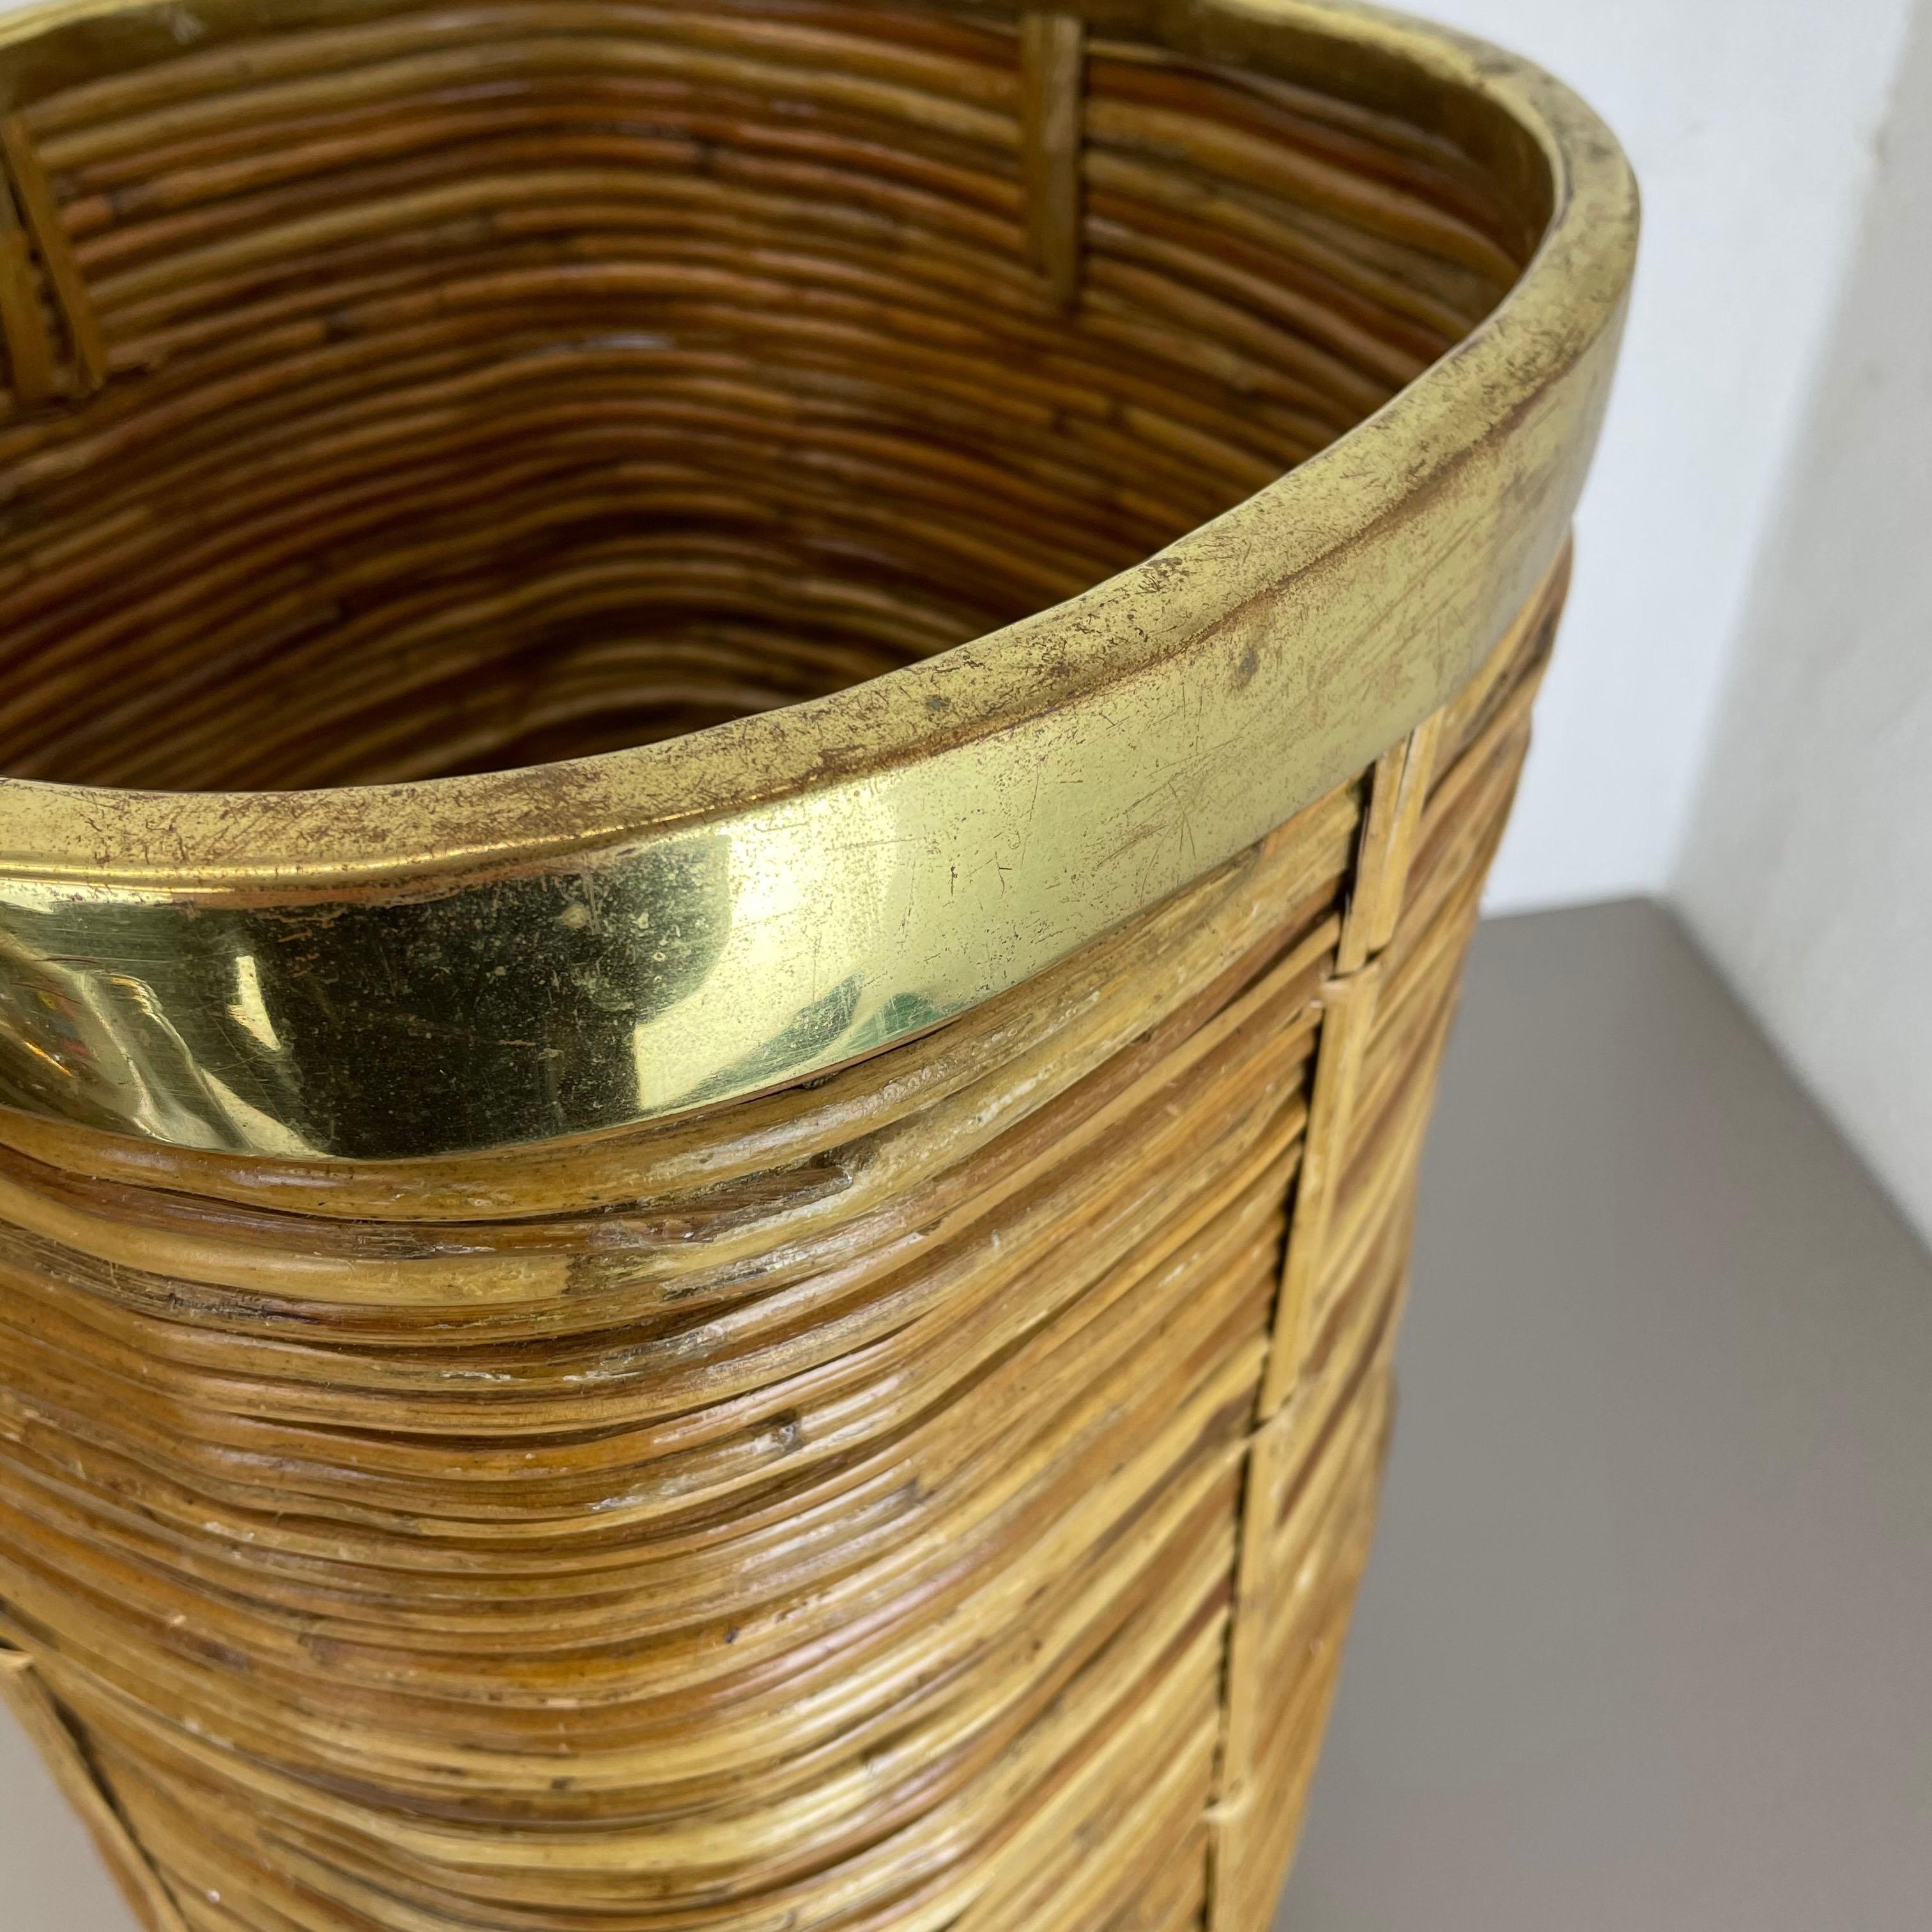 Aubock Style Mid-Century Rattan and Brass Bauhaus Waste Paper Bin, France, 1960s For Sale 3